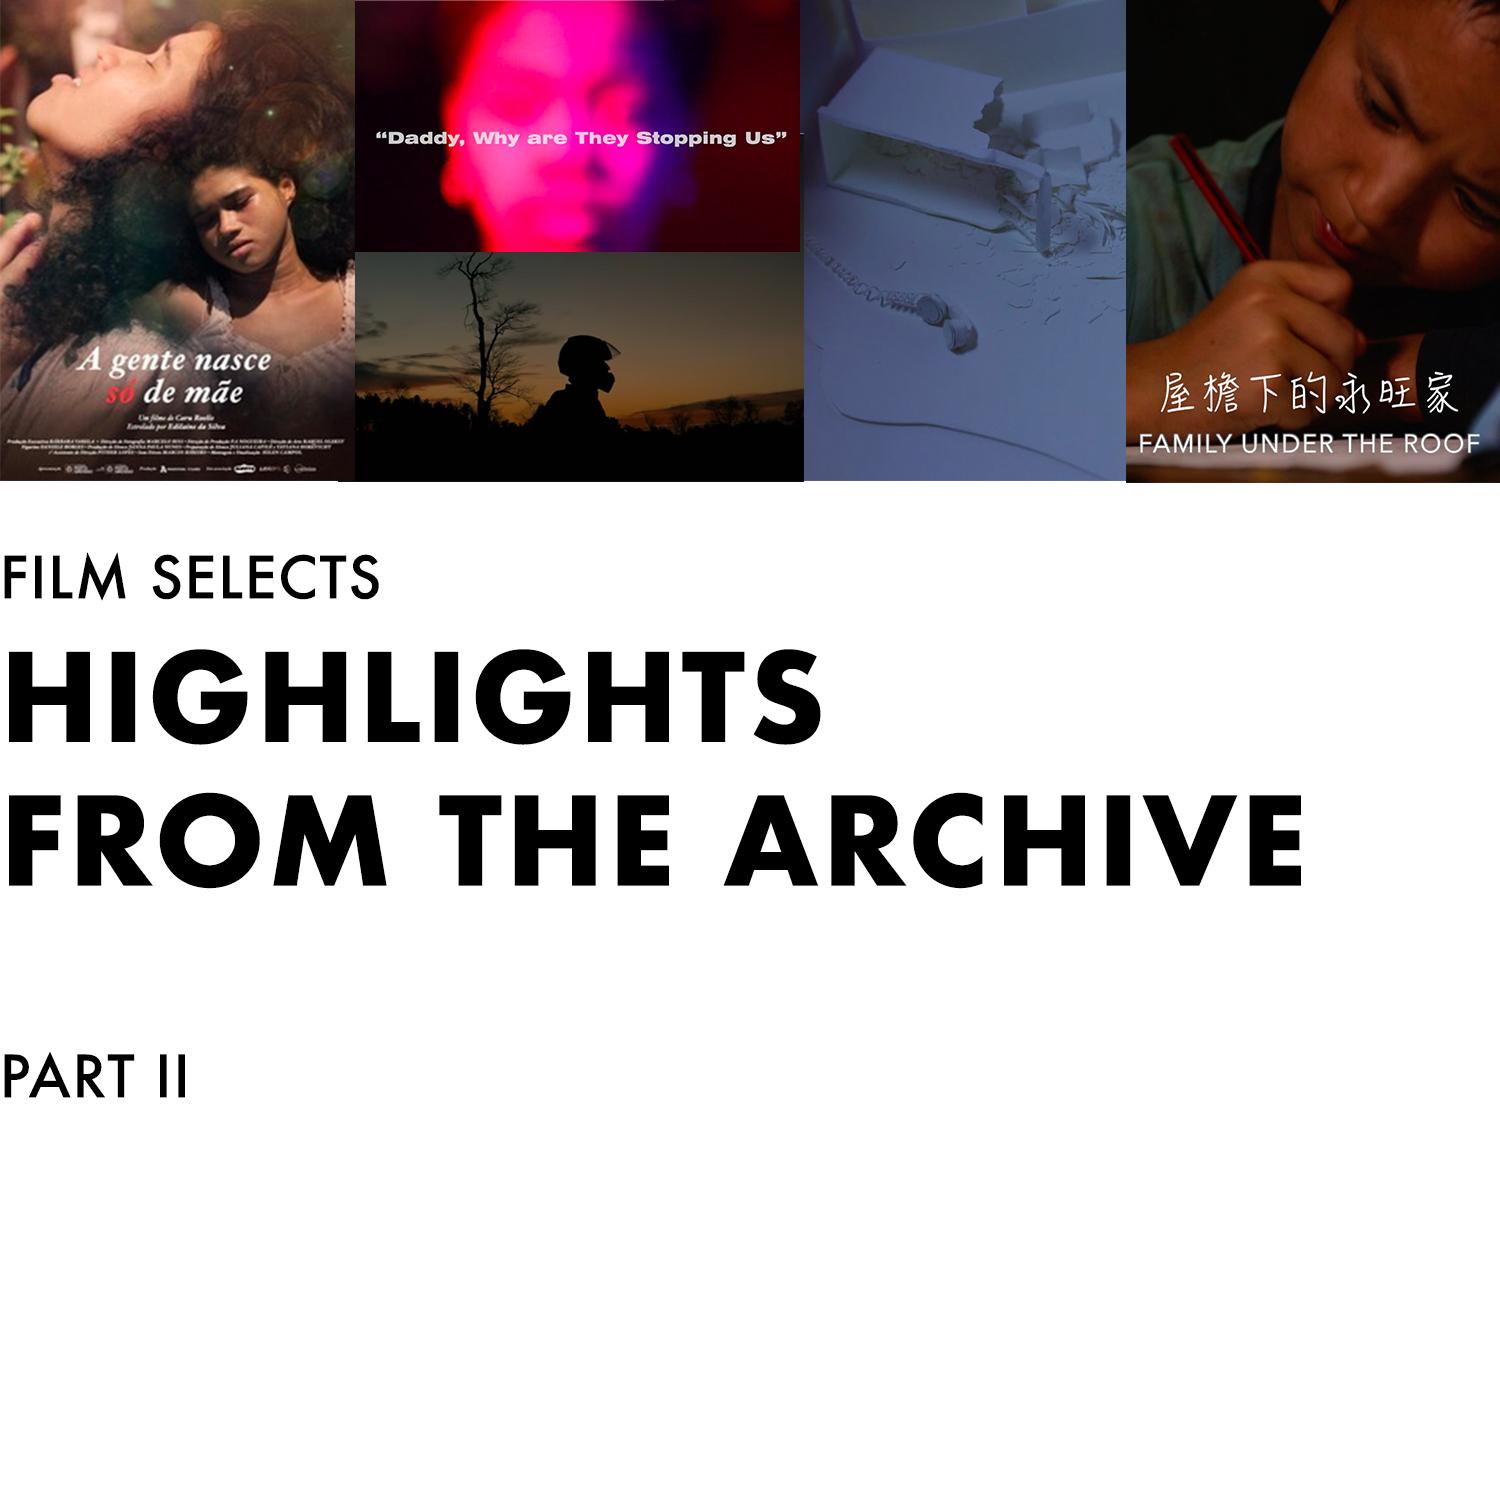 Friday, April 17: Film Selects - 